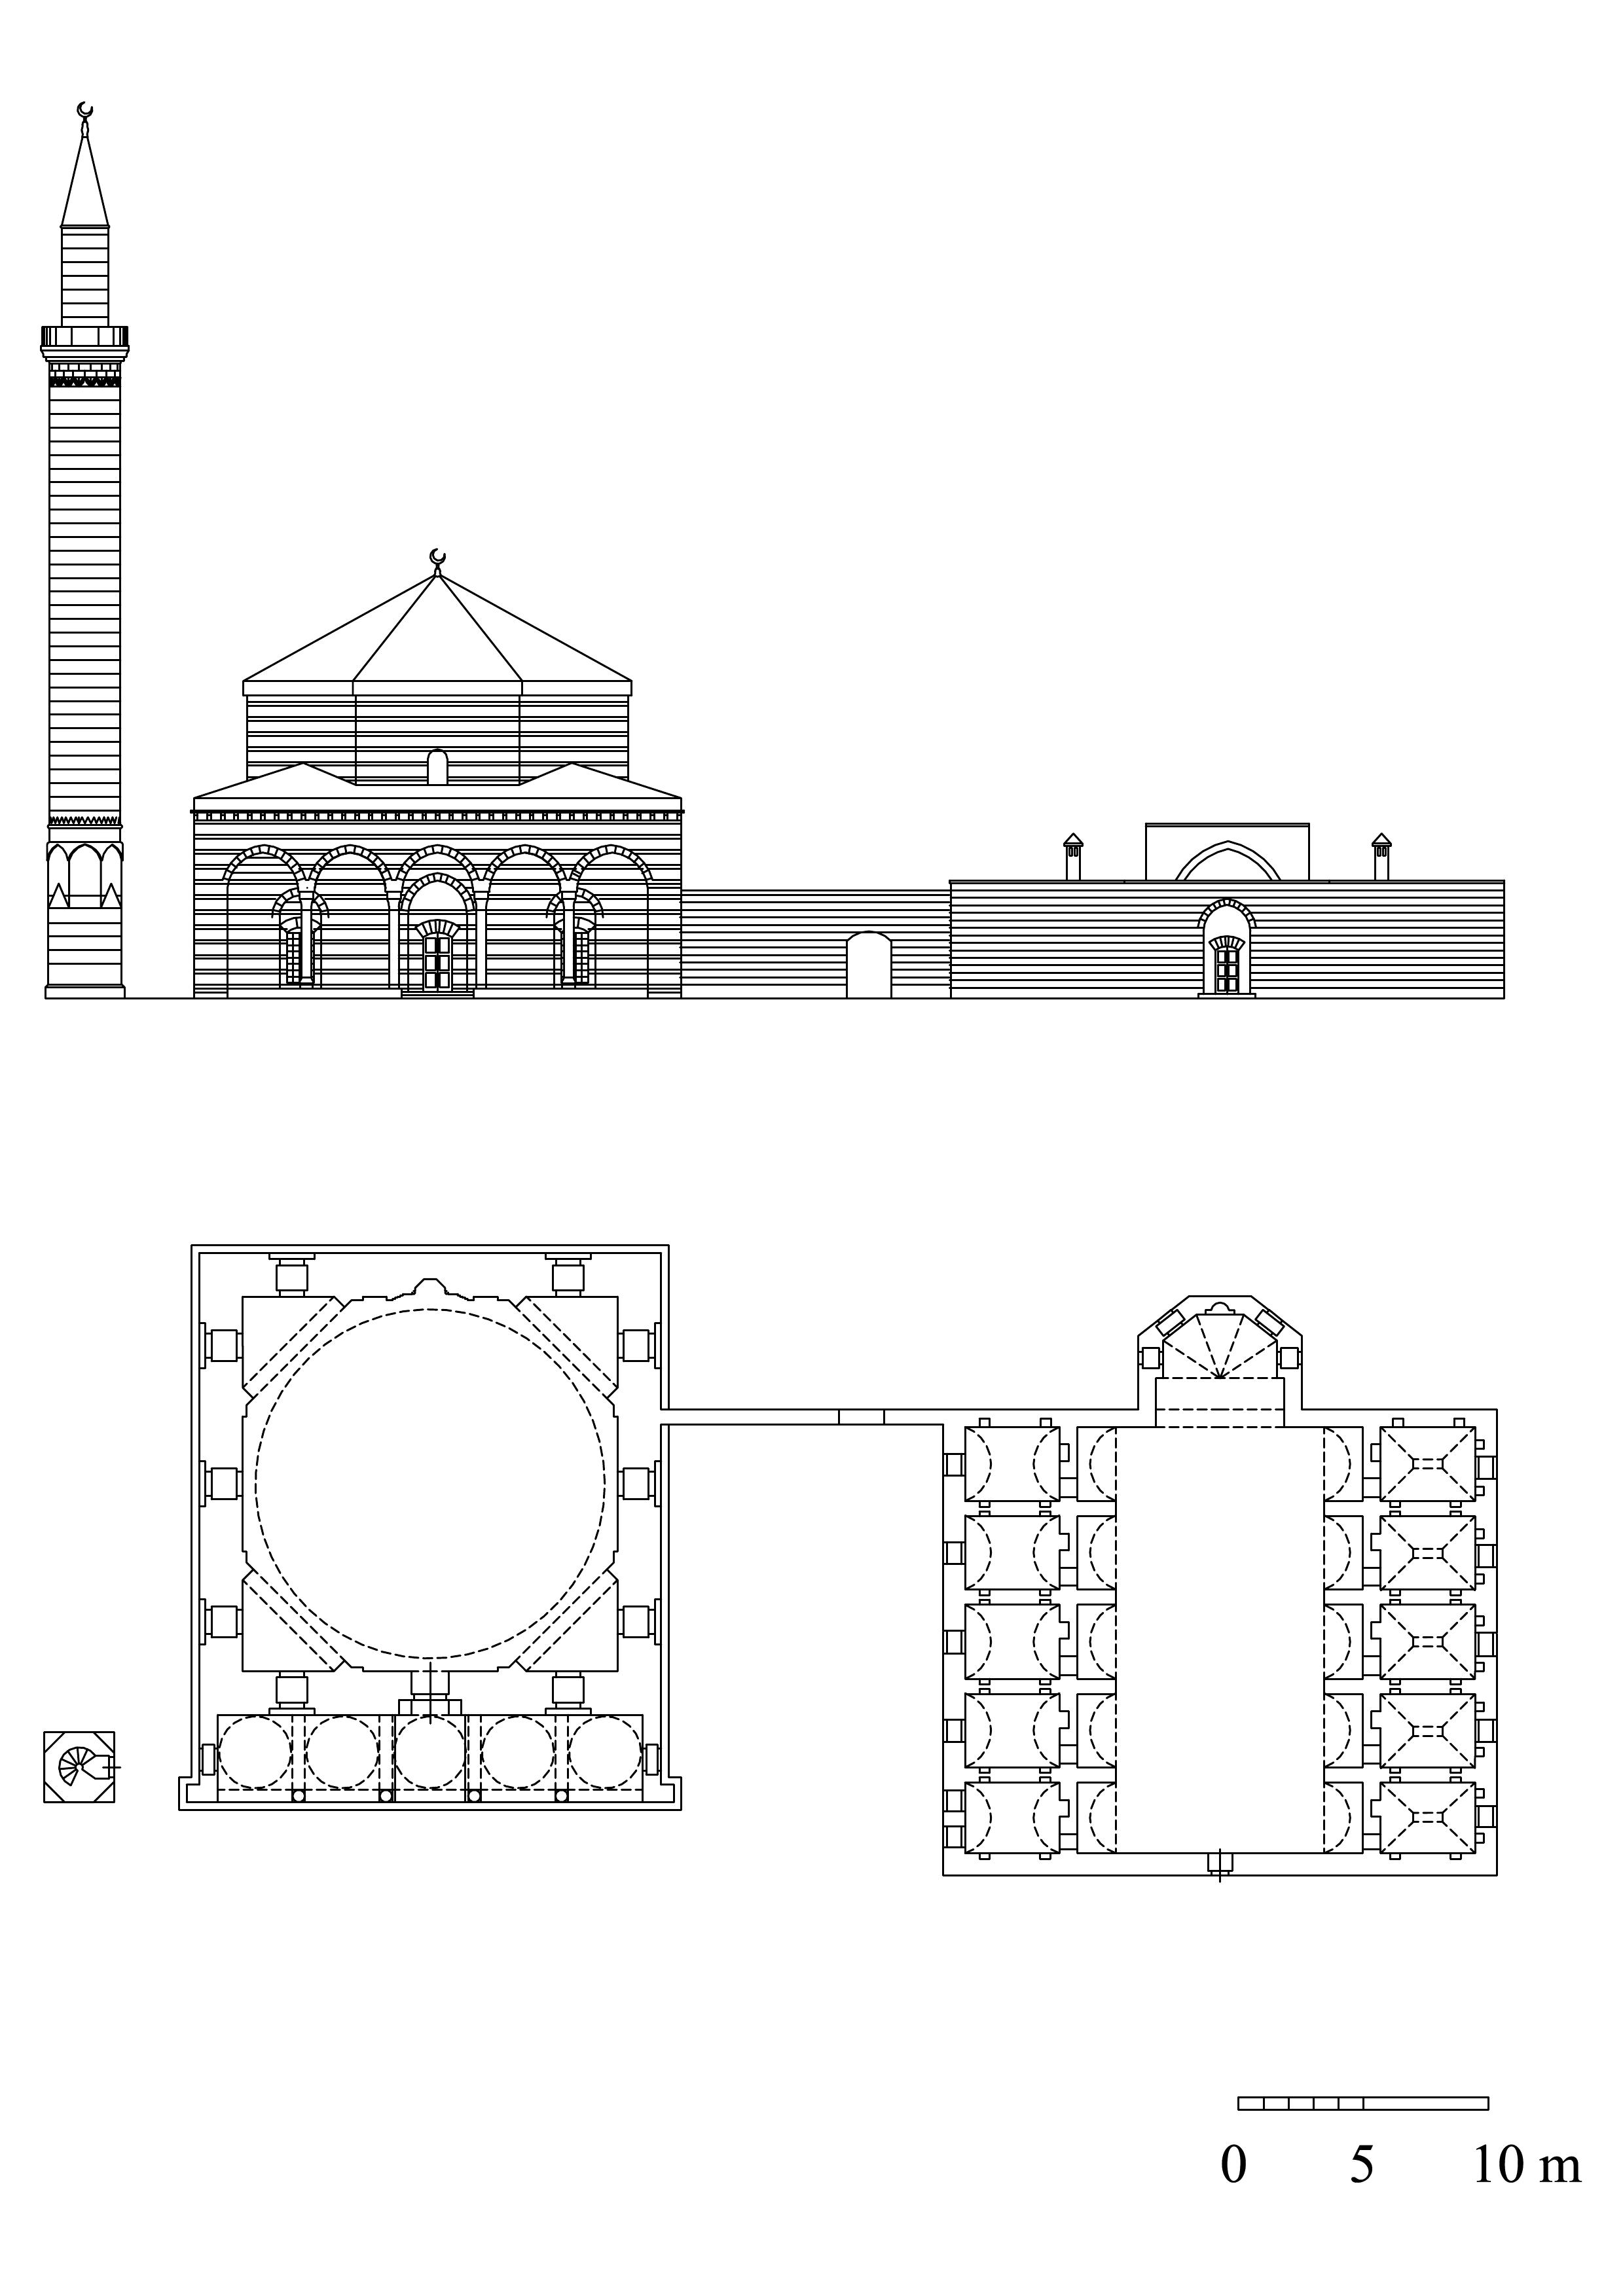 Hadım Ali Paşa Külliyesi - Floor plan and elevation of complex. DWG file in AutoCAD 2000 format. Click the download button to download a zipped file containing the .dwg file.